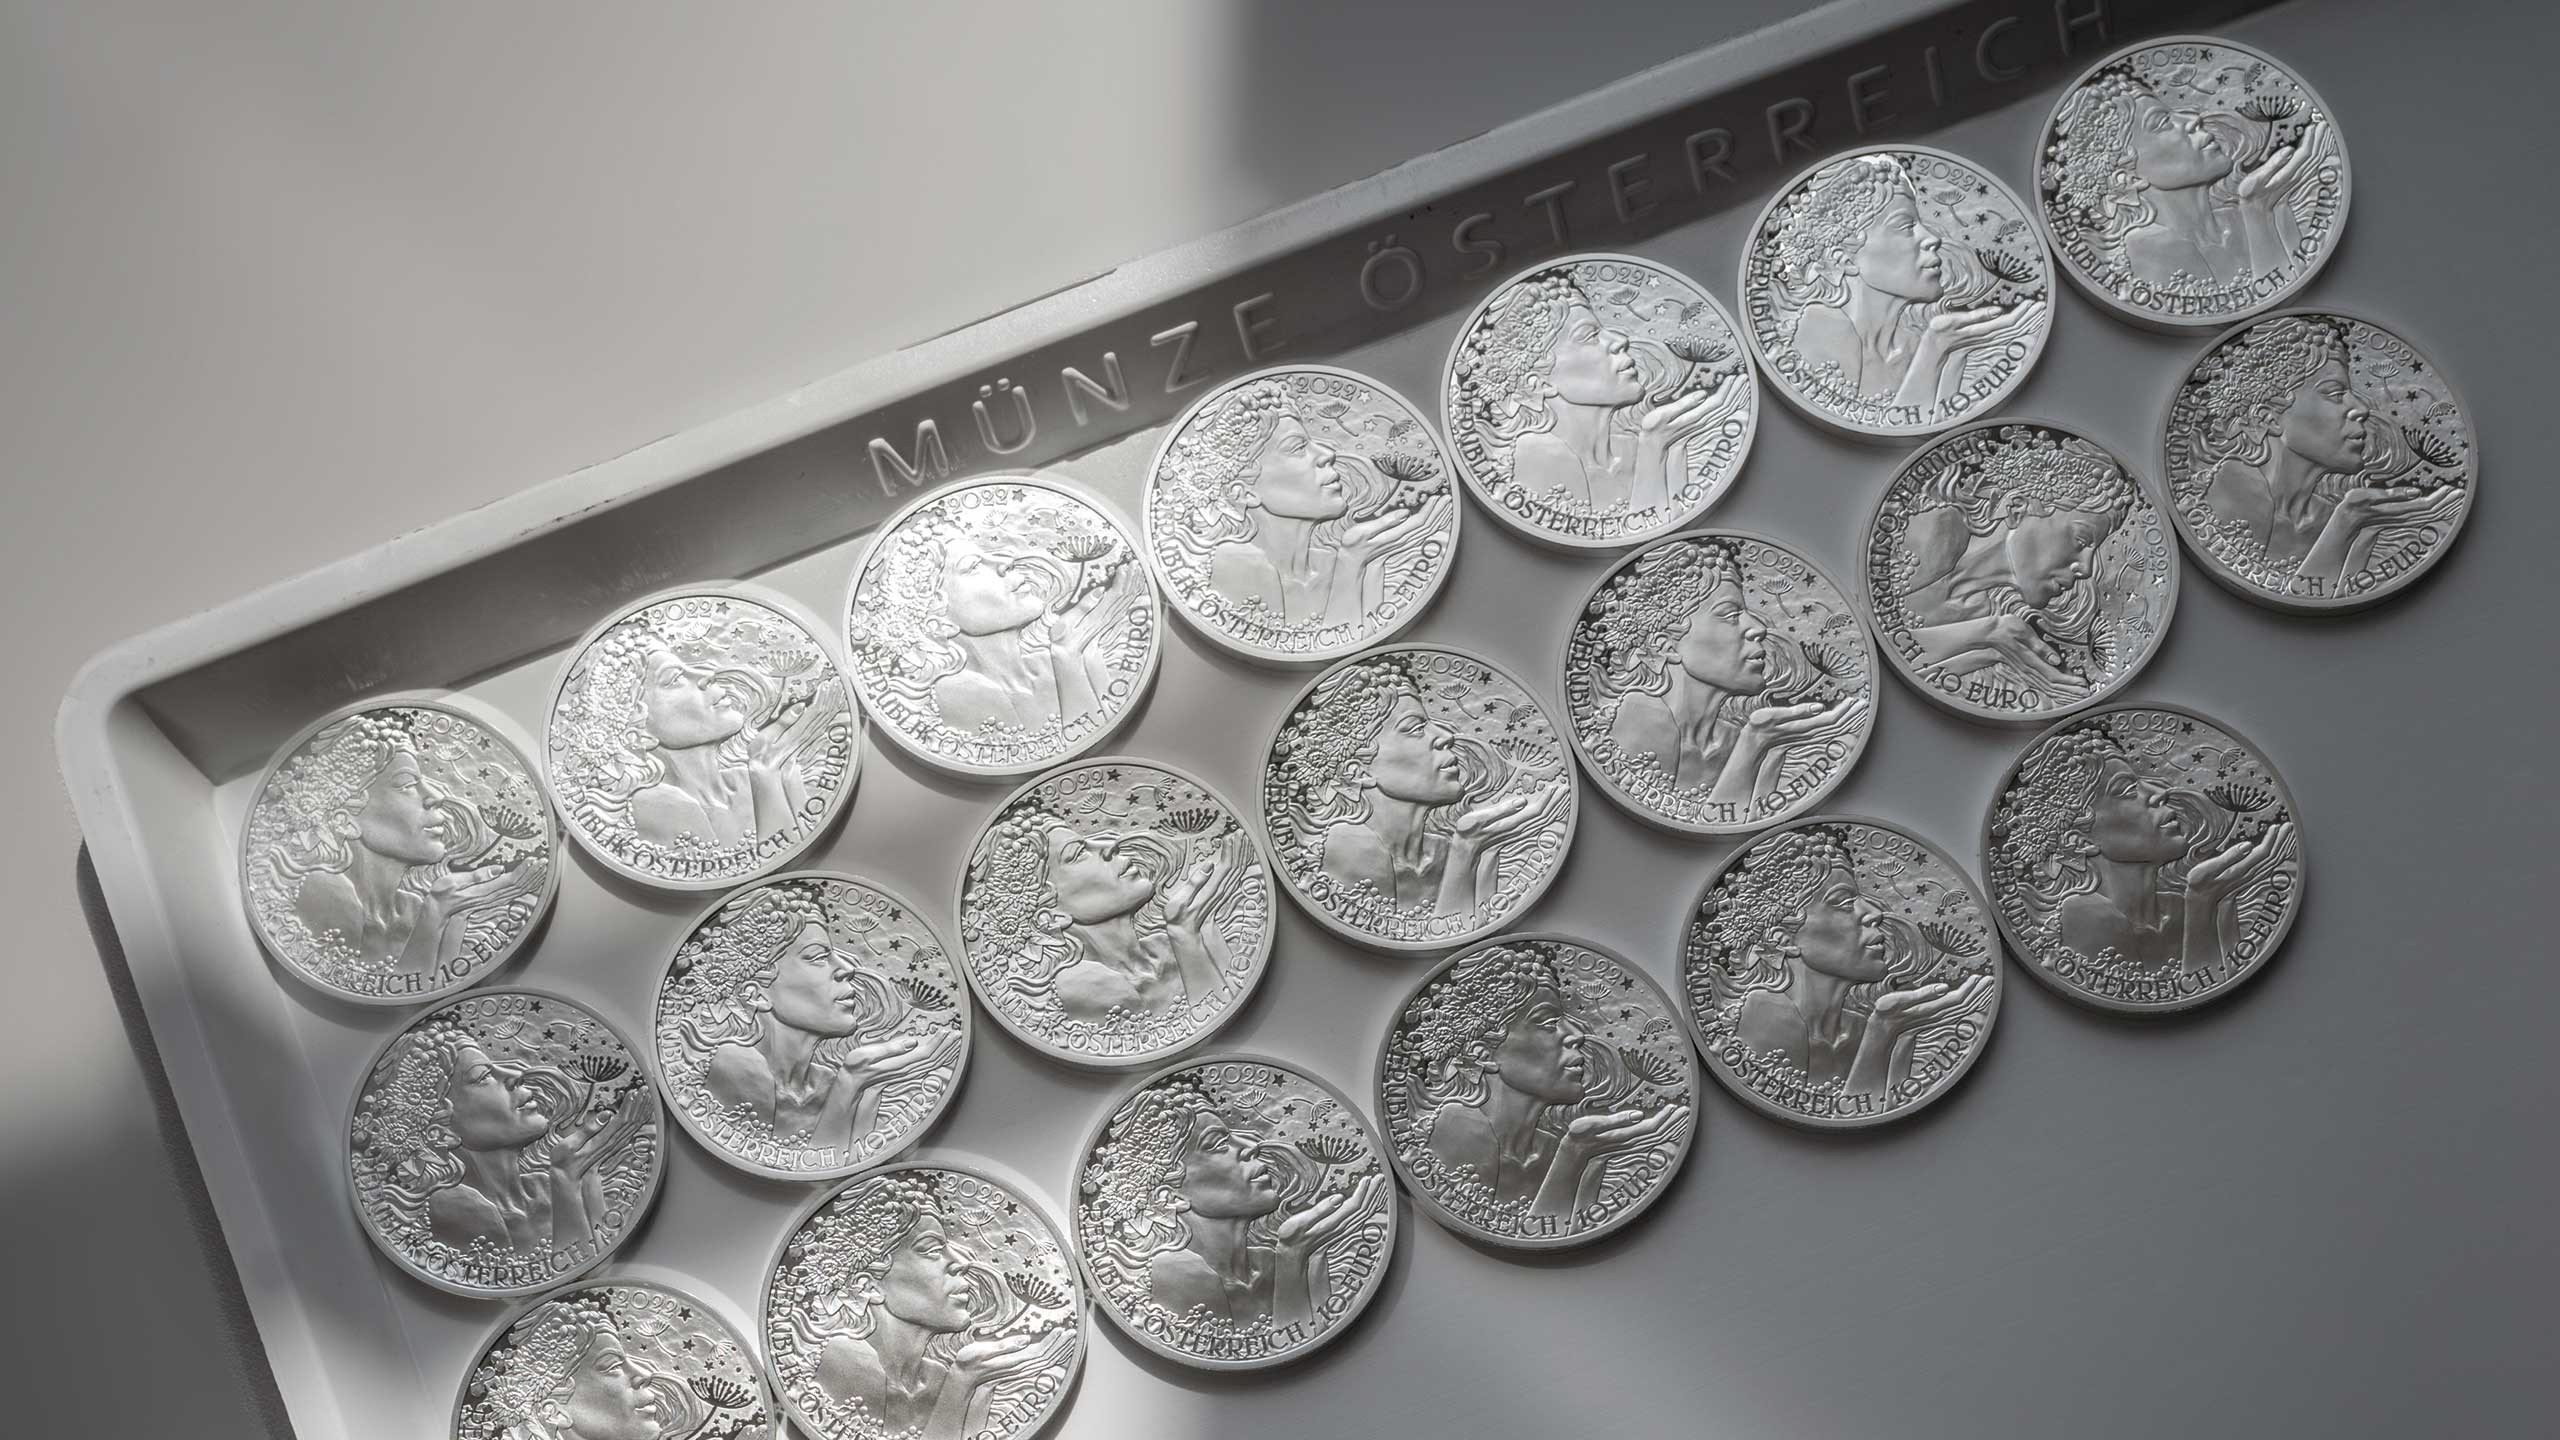 Collector coins tray with many single coins